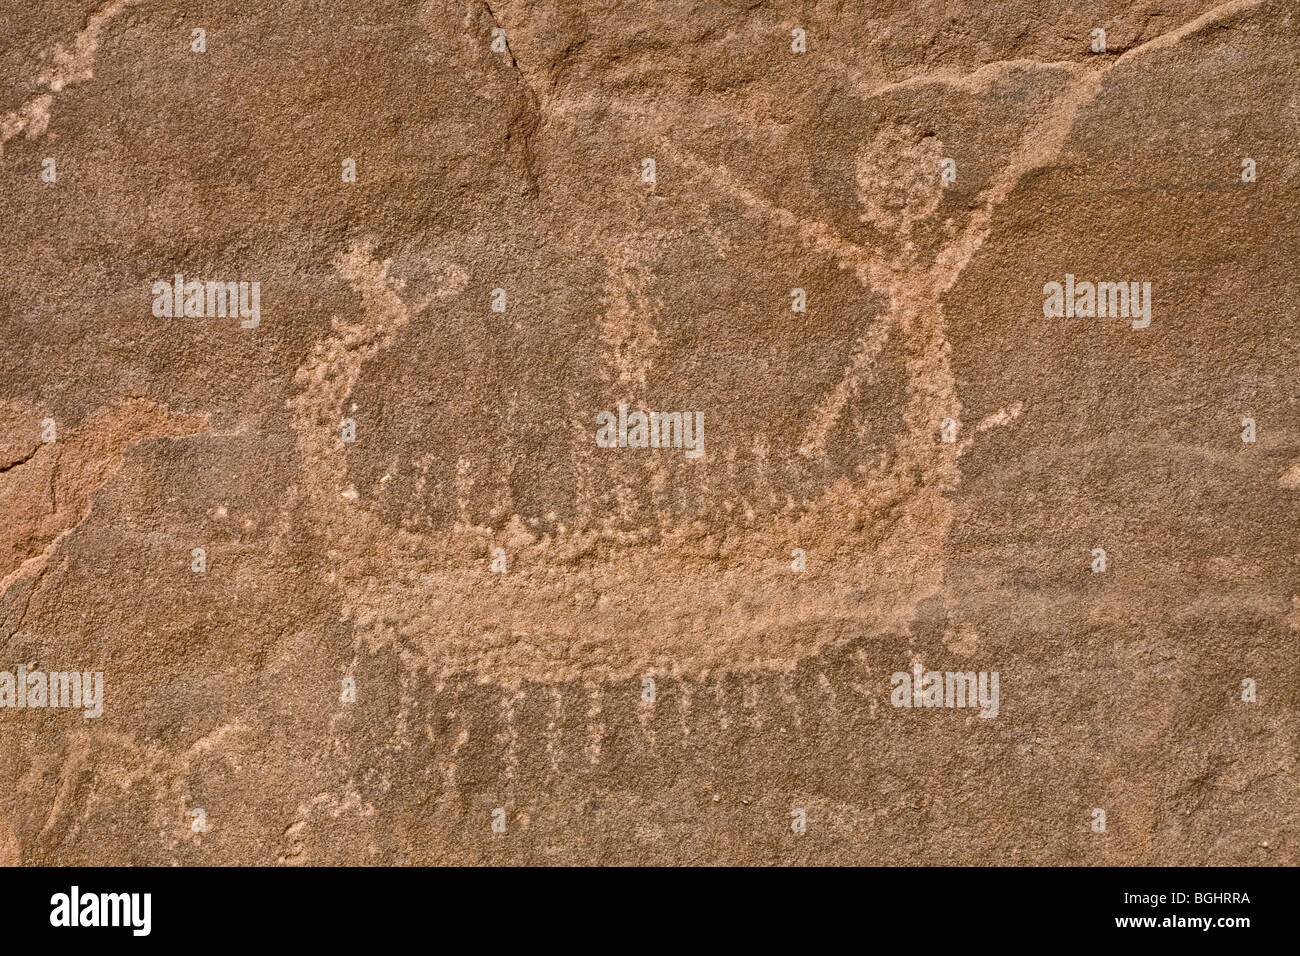 Close up of one of the small boat images at Winklers famous Rock-Art site 26 in Wadi Abu Wasil in the Eastern Desert of Egypt. Stock Photo